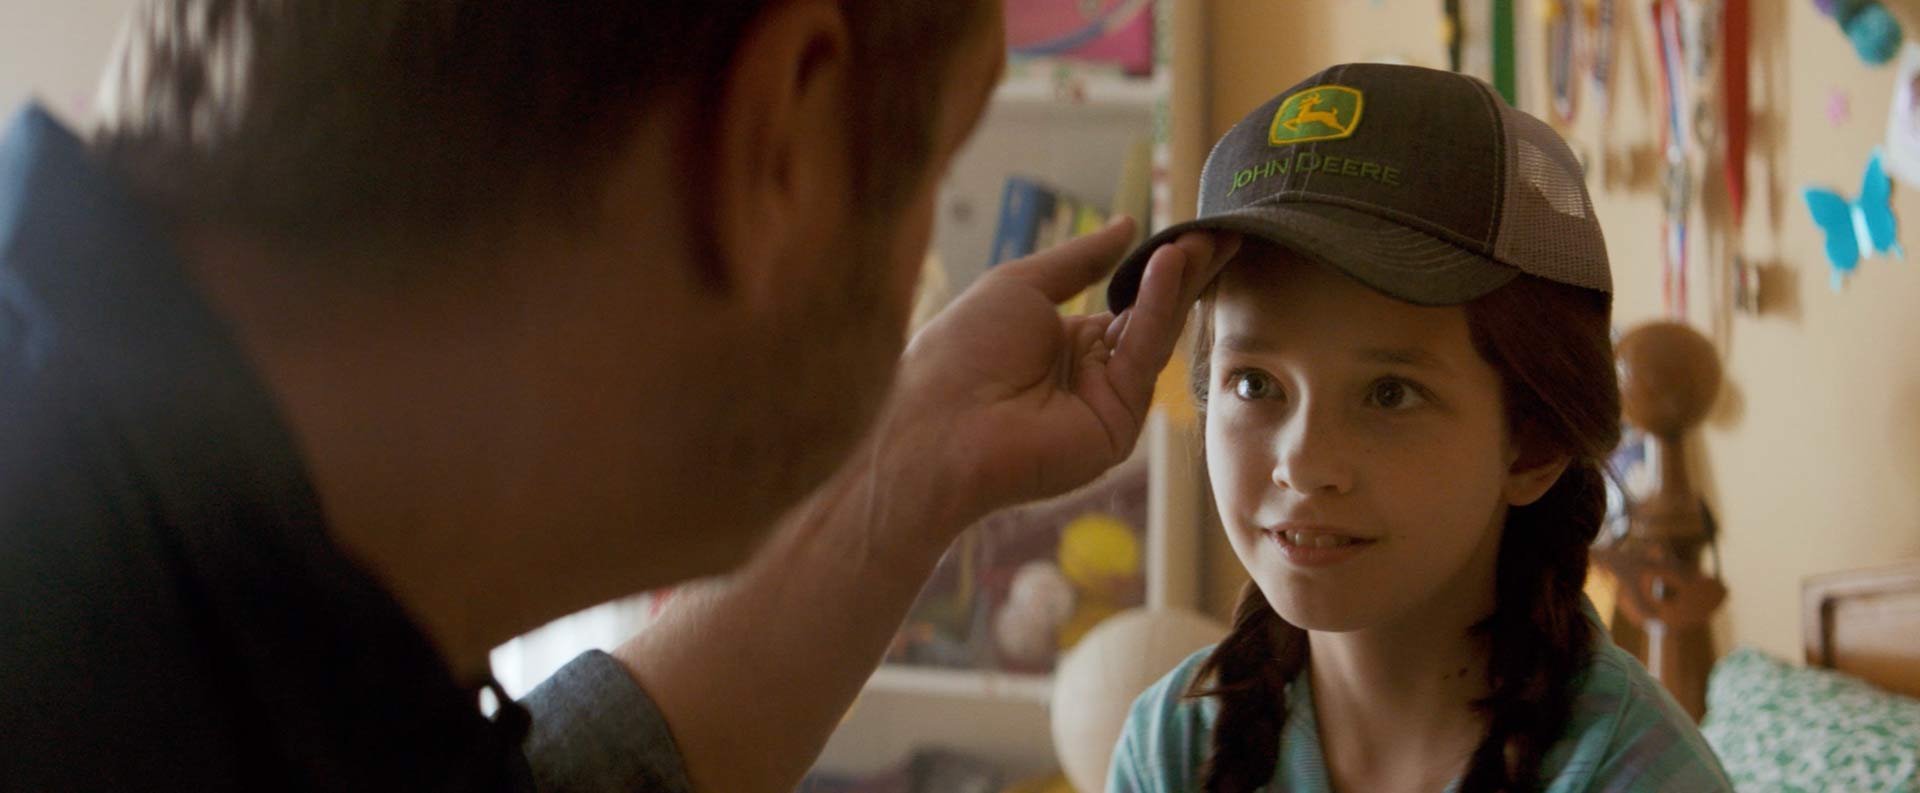 Dad places John Deere cap on young girl's head